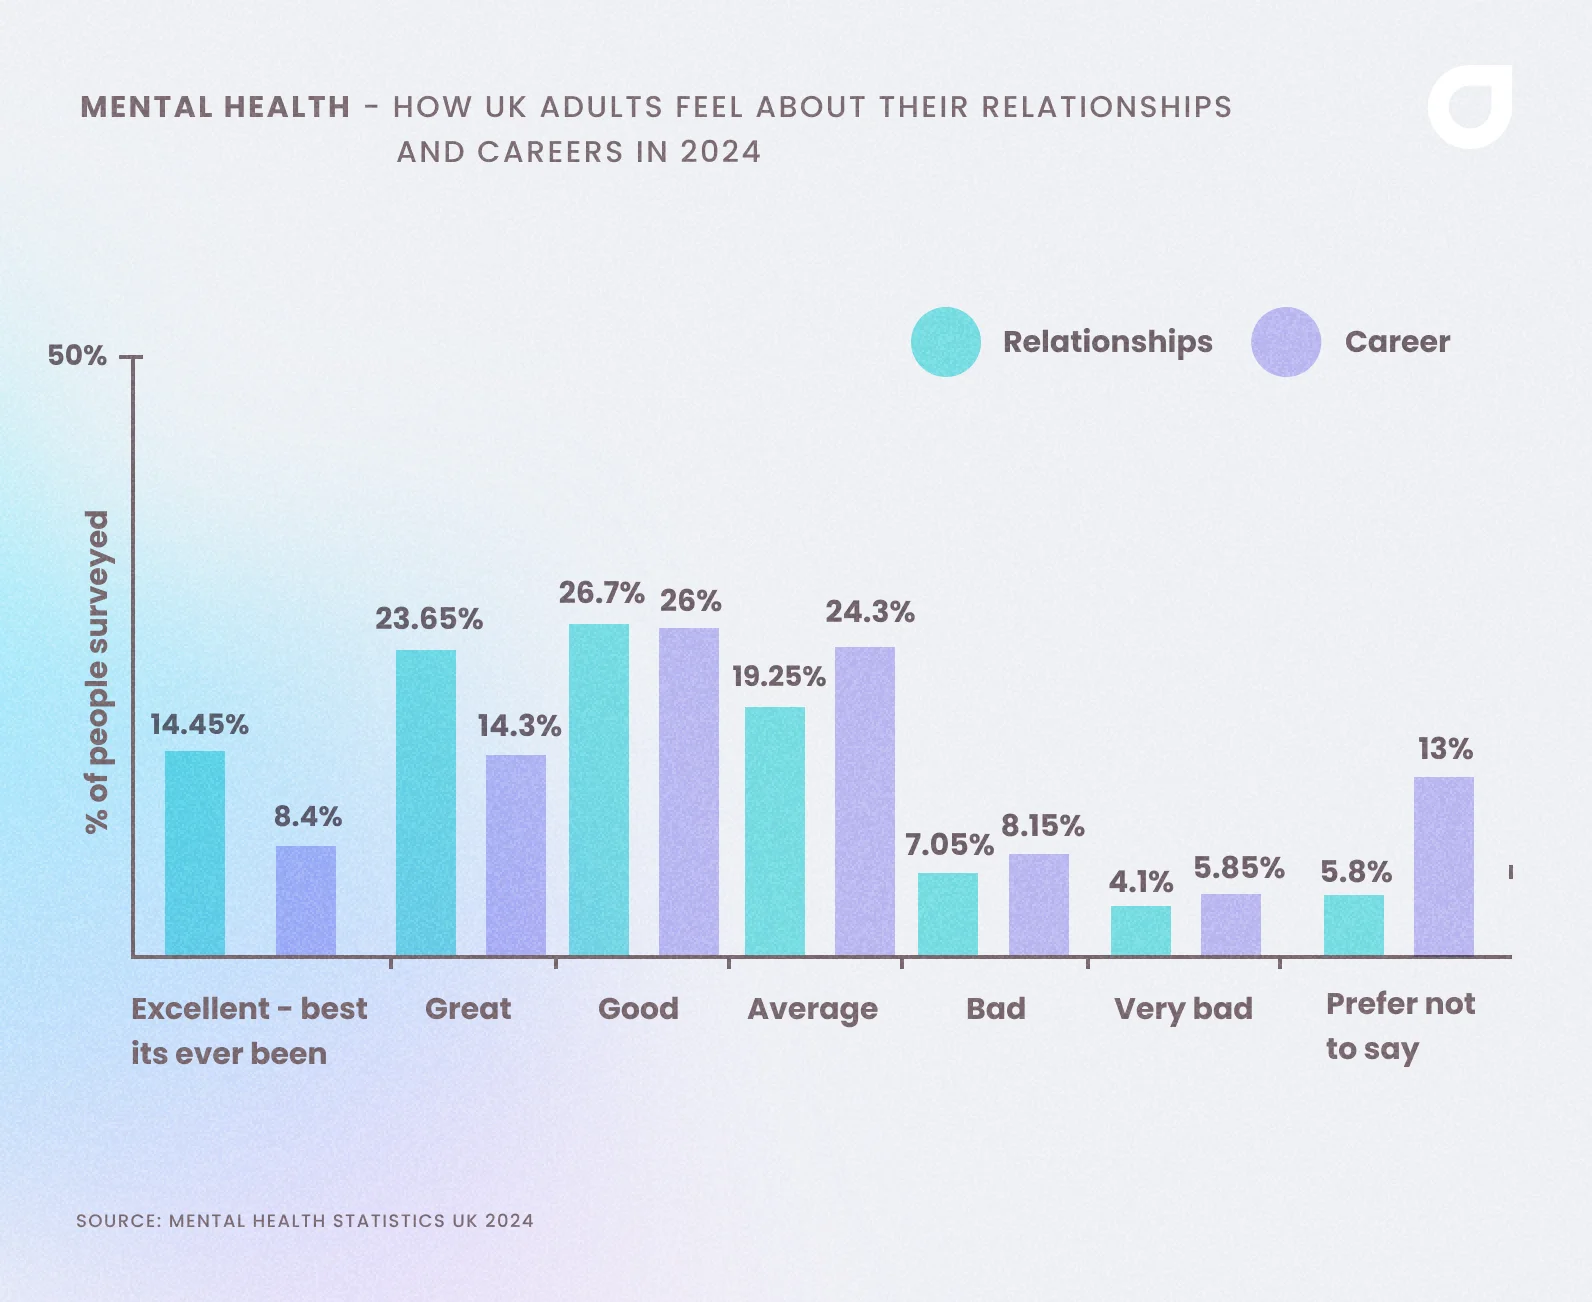 Graph showing how UK adults would describe their relationships and careers in 2024